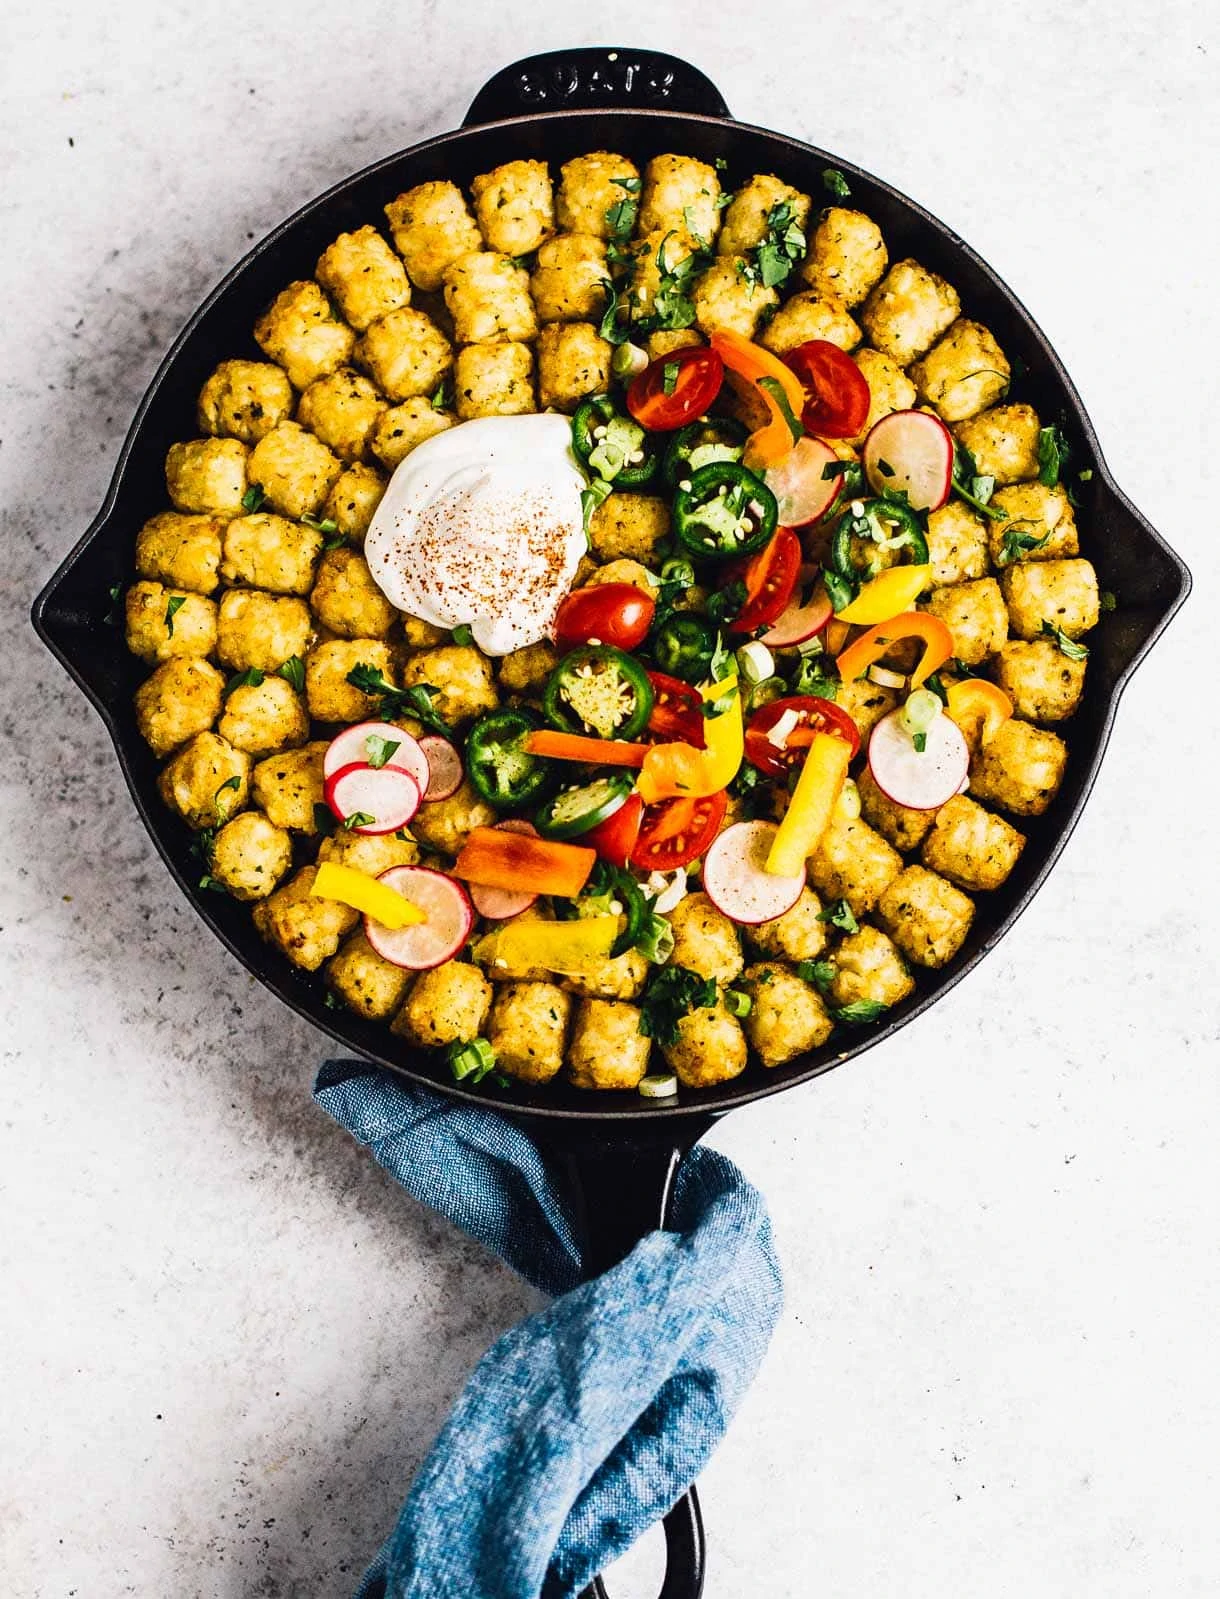 tater tot casserole in a cast iron skillet, overhead photograph